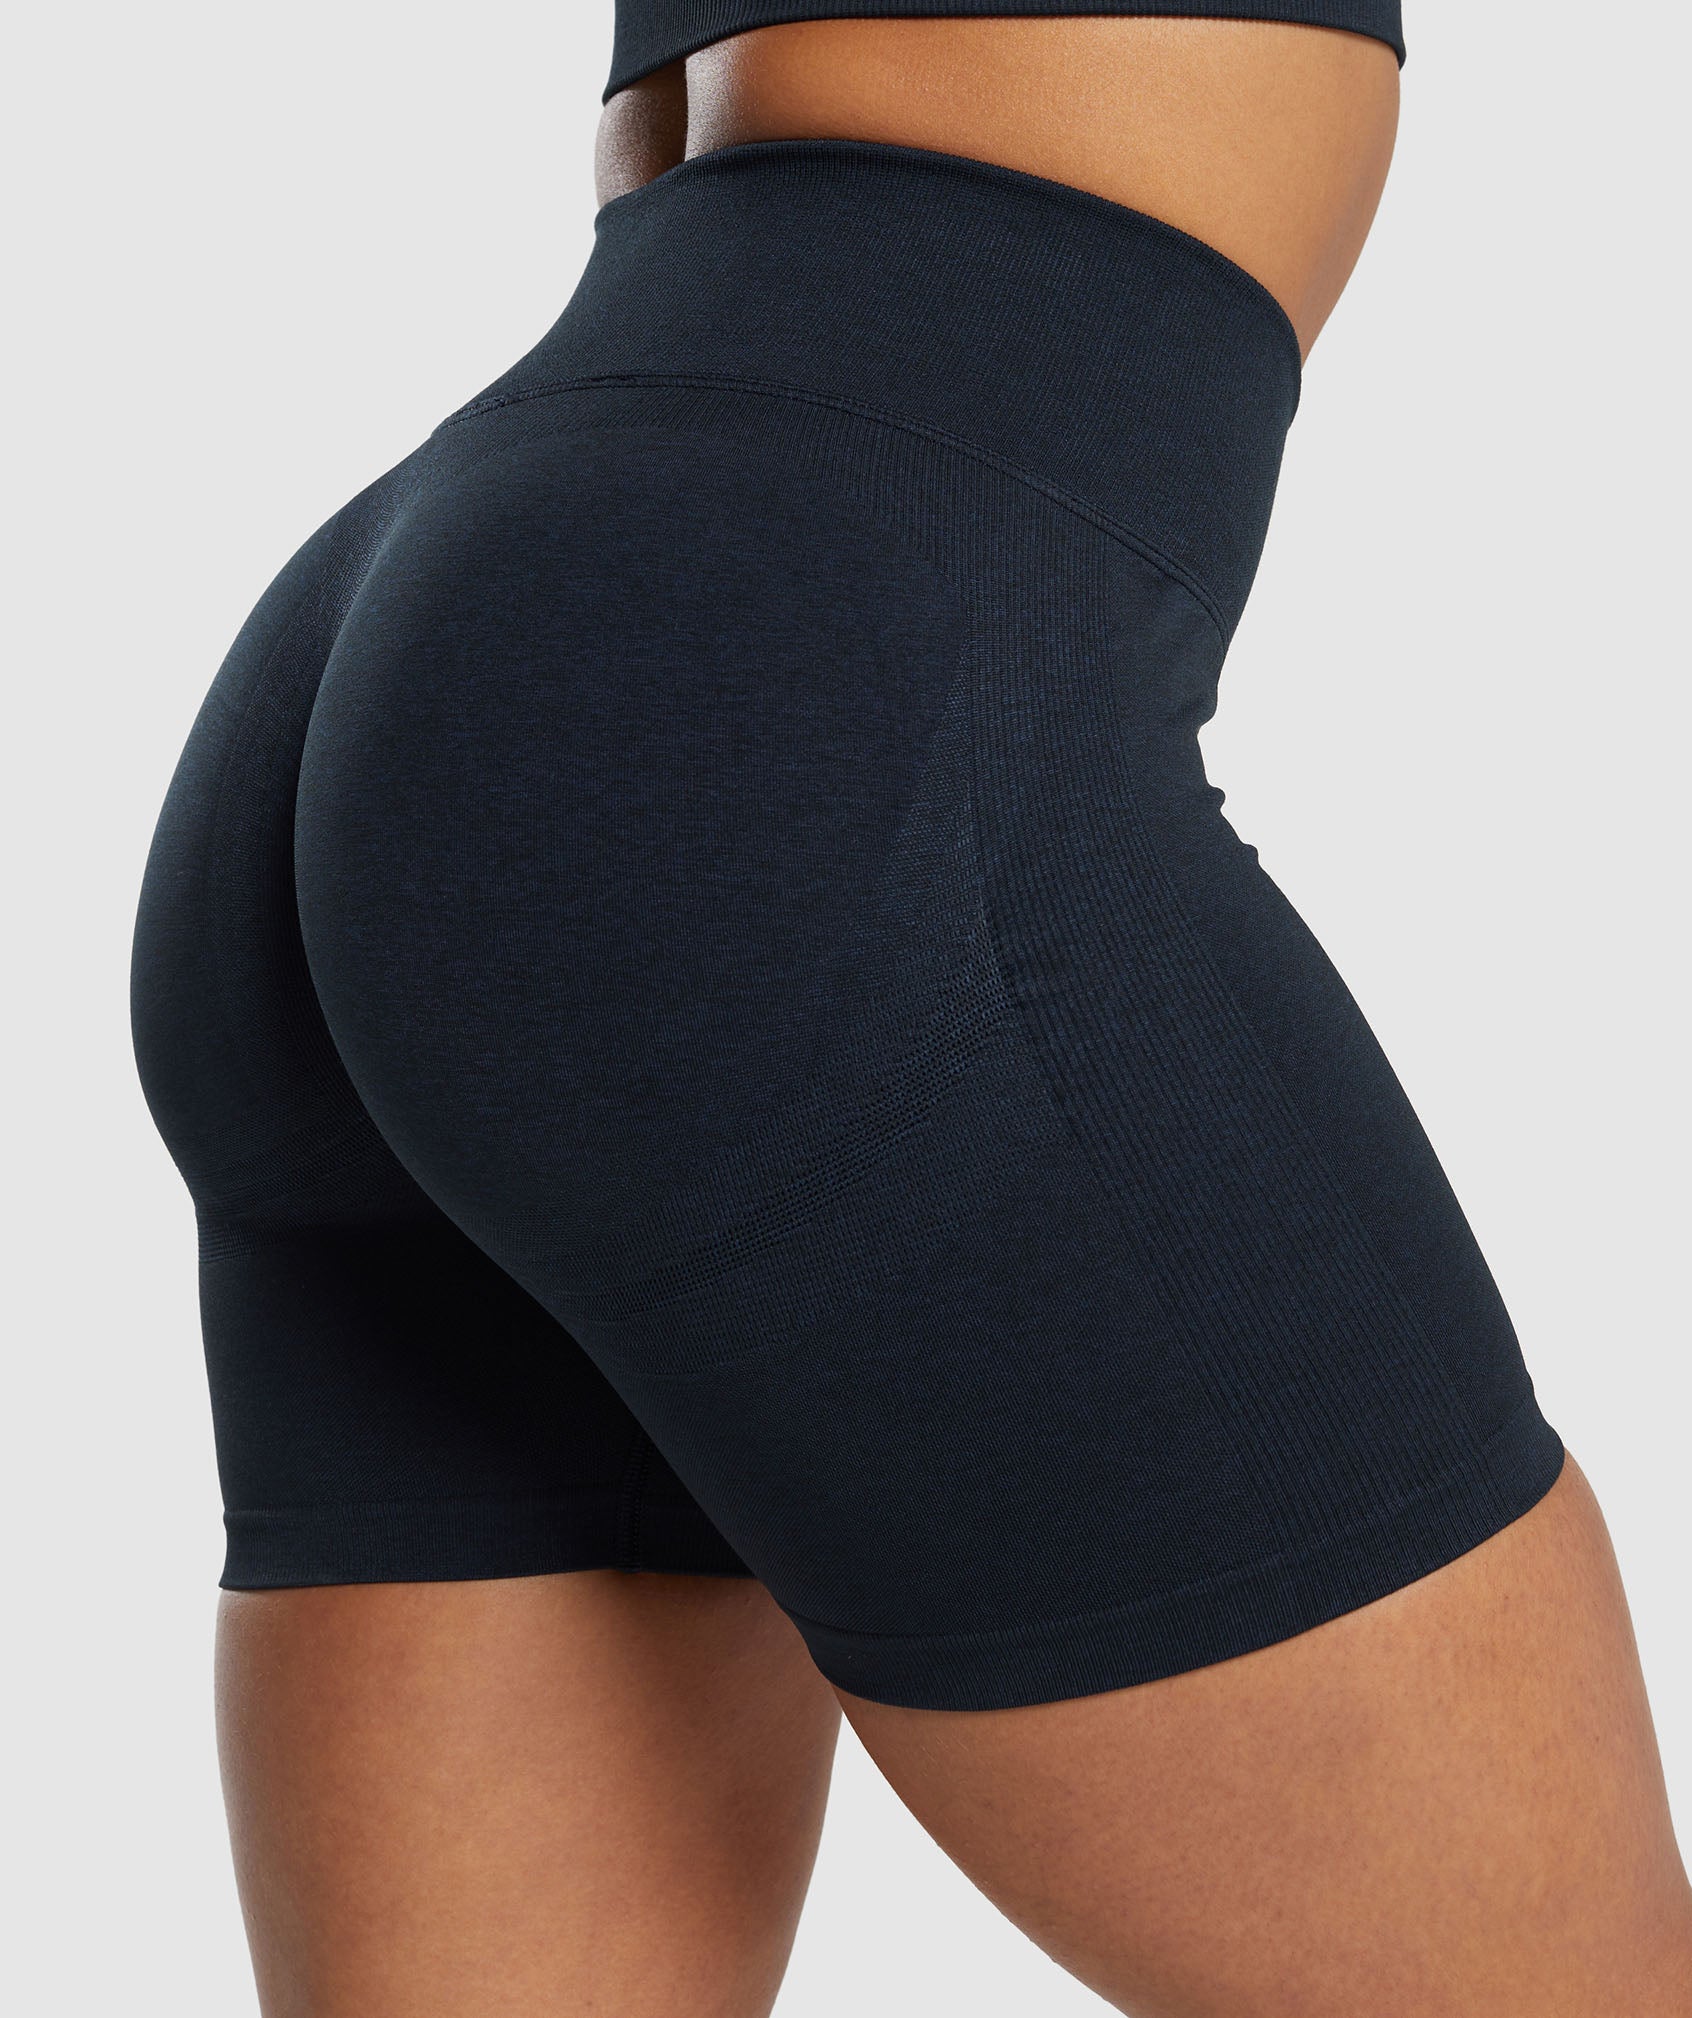 Lift Contour Seamless Shorts in Midnight Blue/Black Marl - view 6